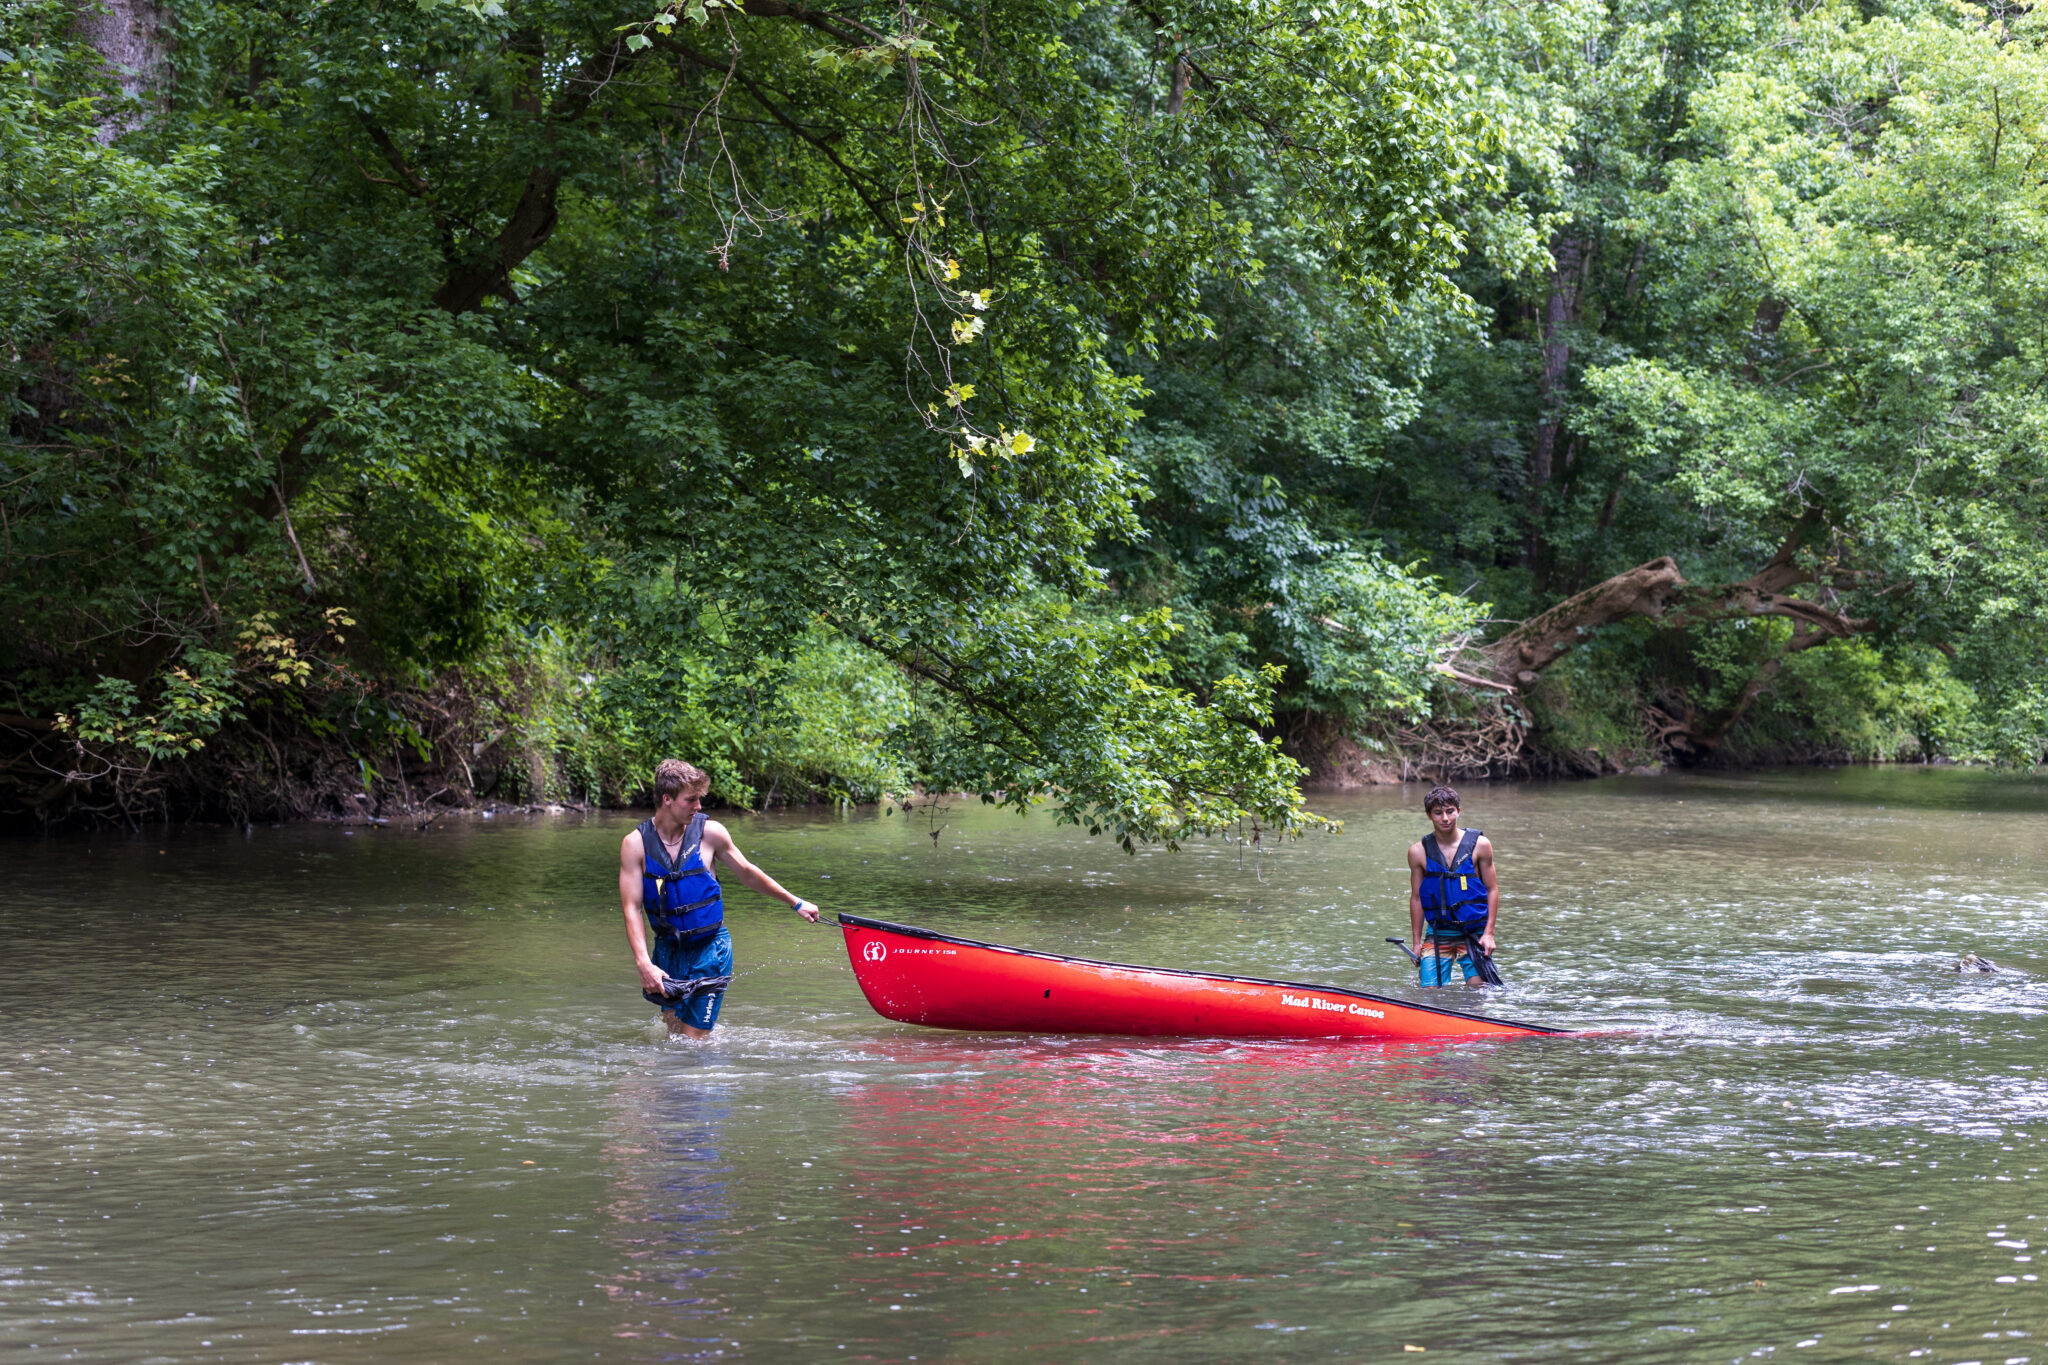 Two people participating in the P.L.E.D.G.E. Leadership Program, standing in a river with a red canoe.